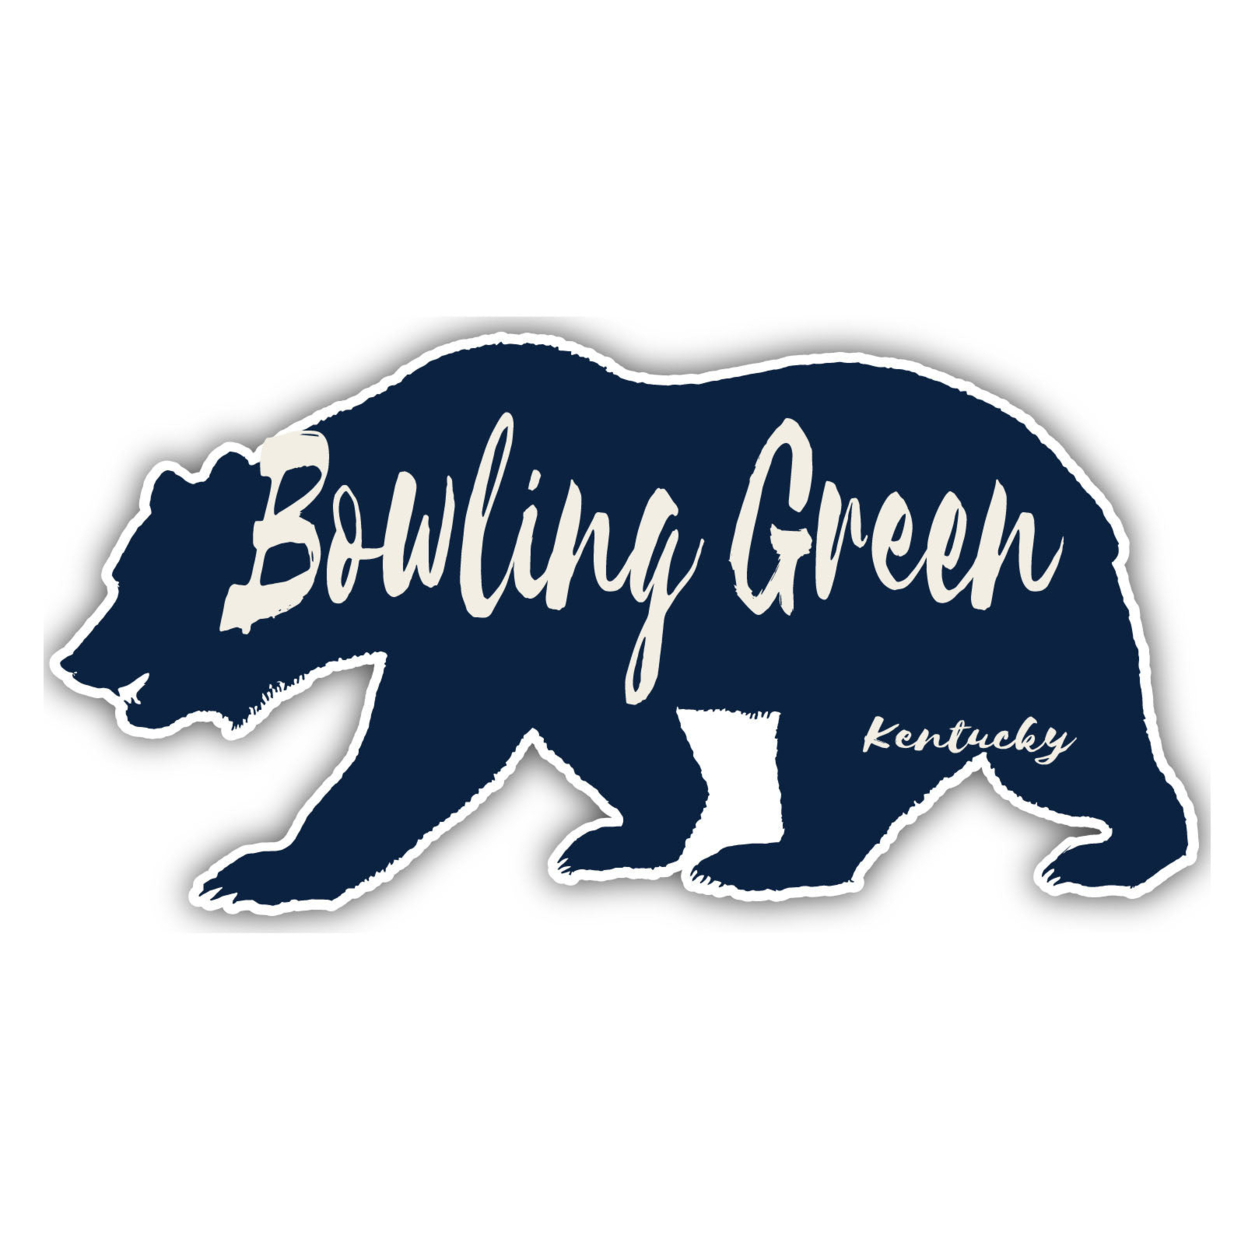 Bowling Green Kentucky Souvenir Decorative Stickers (Choose Theme And Size) - Single Unit, 2-Inch, Camp Life